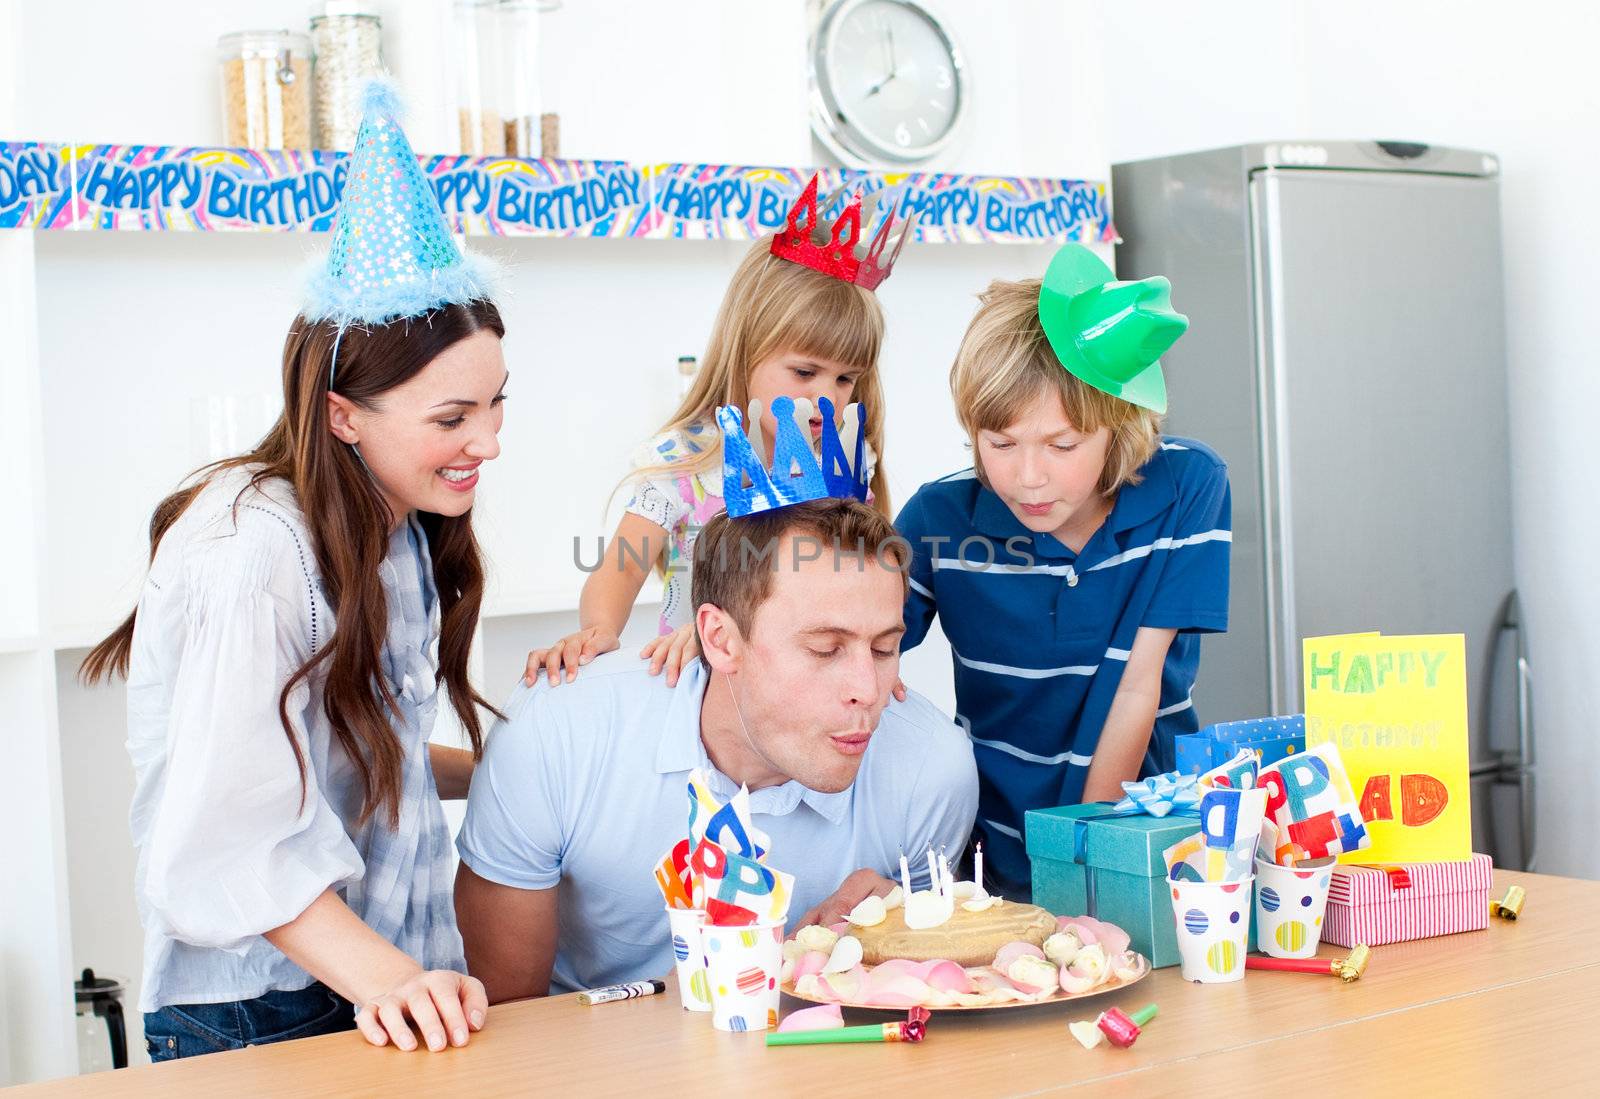 Elegant man celebrating his birthday with his wife and his child by Wavebreakmedia